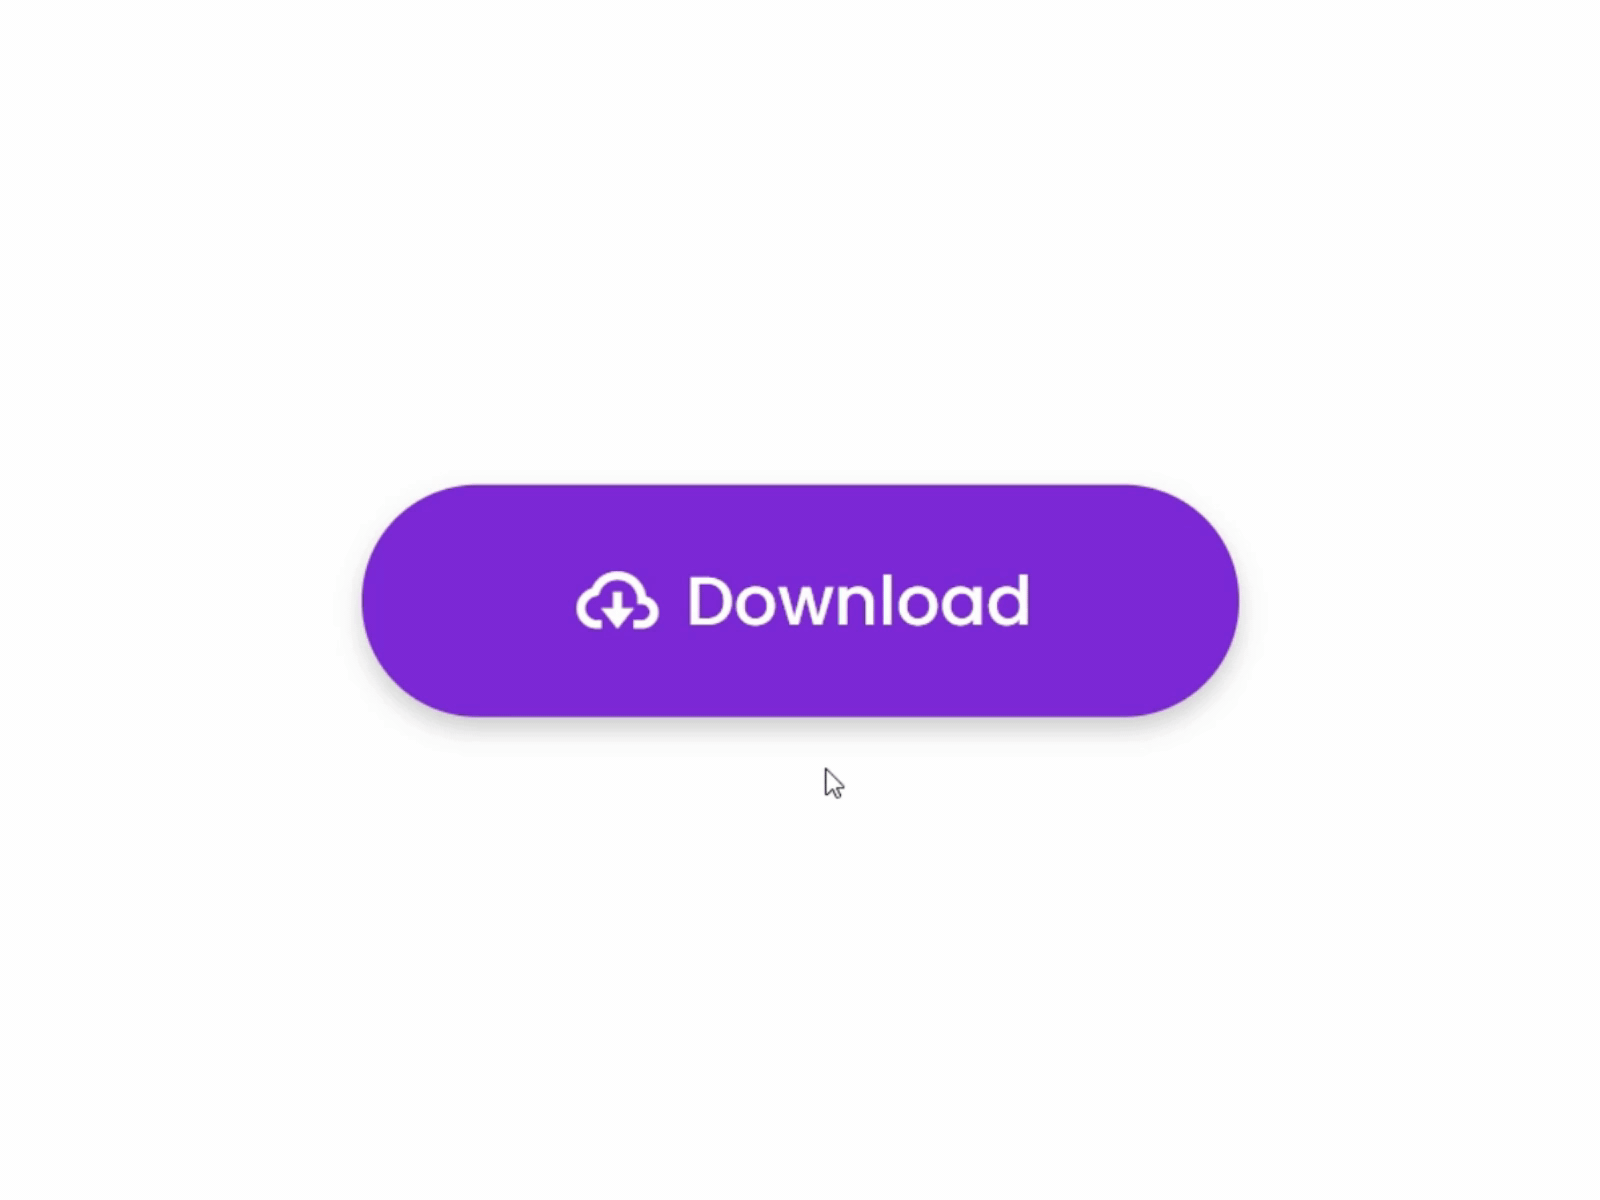 Button with Progress Bar animated button animation button button animation coding lab codinglab codinglabweb css button download button html css html css javascript loader progress progress bar ui upload button ux